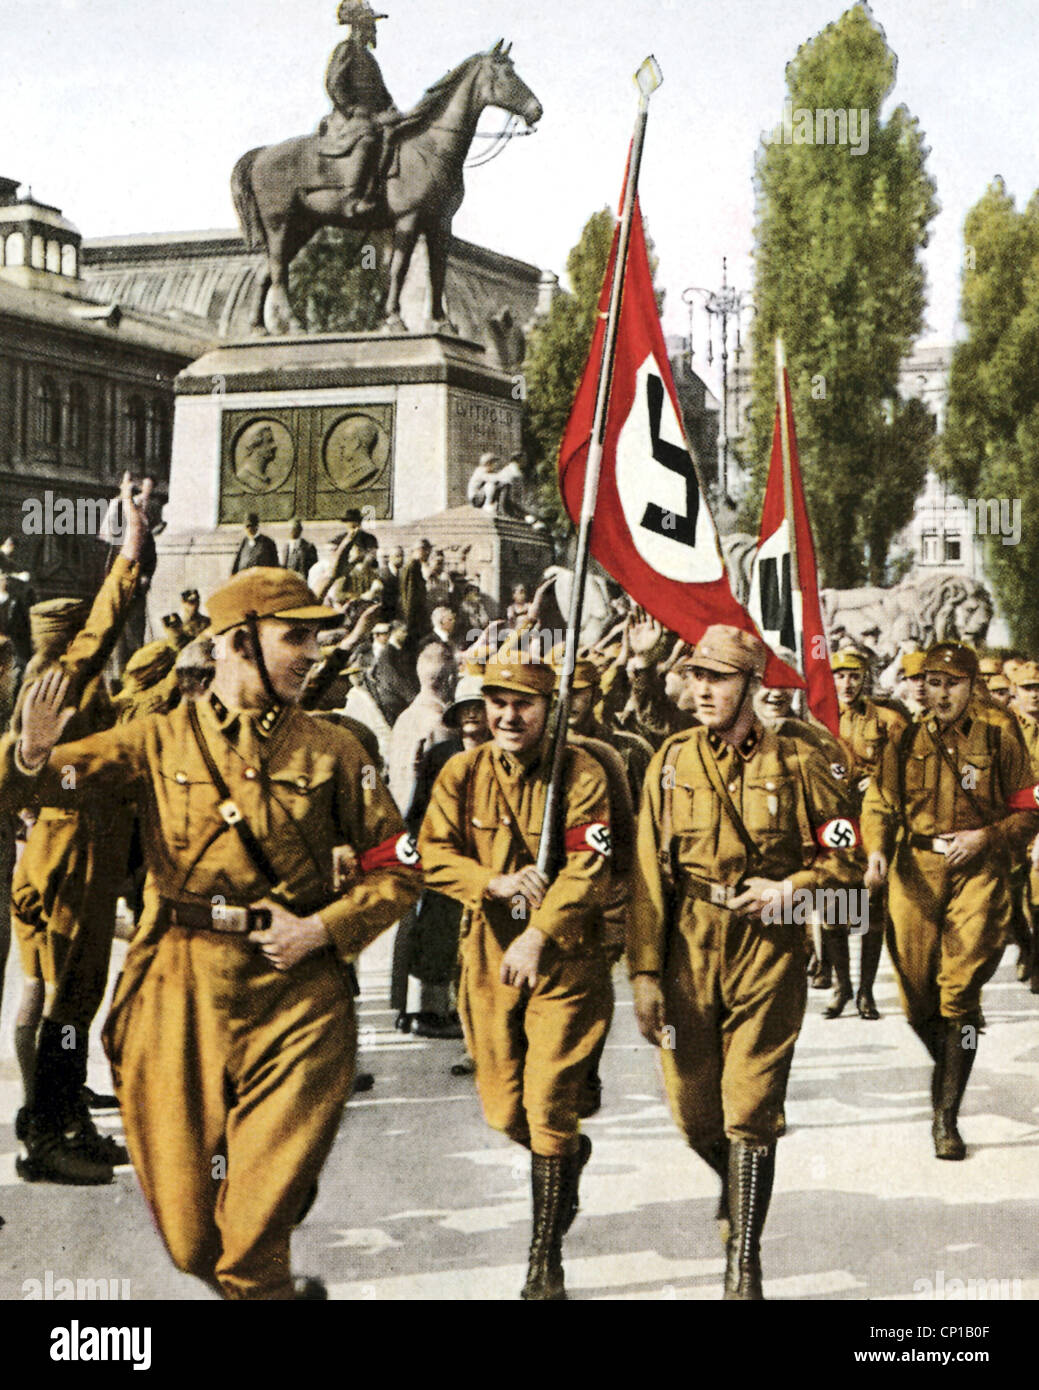 Wessel, Horst, 9.10.1907 - 23.2.1930, German Nazi activist, half length, as leader of a SA unit in Nuremberg 1929, coloured photo, detail with H. Wessel, Stock Photo